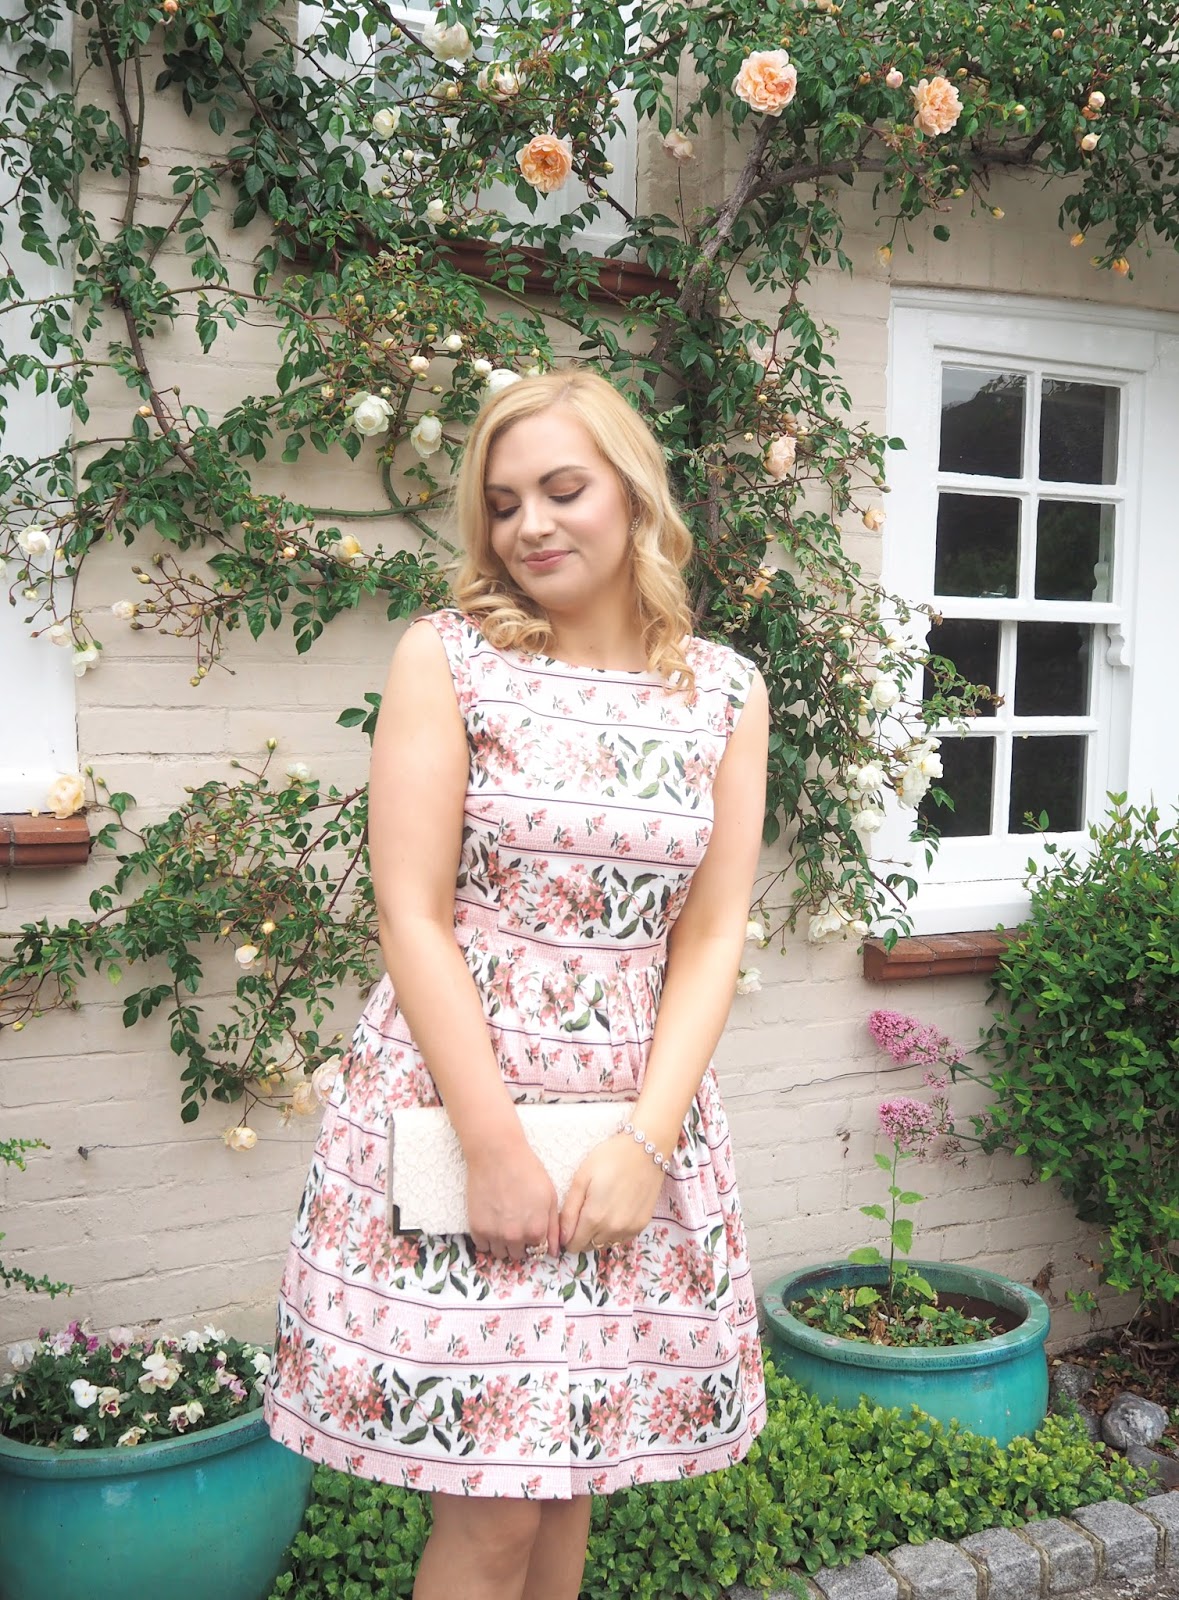 Wedding Guest Outfit Ideas, Katie Kirk Loves, UK Blogger, Wedding Outfit, Oasis Fashion, Pink Princess Dress, Hotter Shoes, Comfortable Heels, Fashion Blogger, Outfit Blogger, Style Blogger, Fashion Influencer, Style Influencer, Wedding Inspiration, Wedding Style